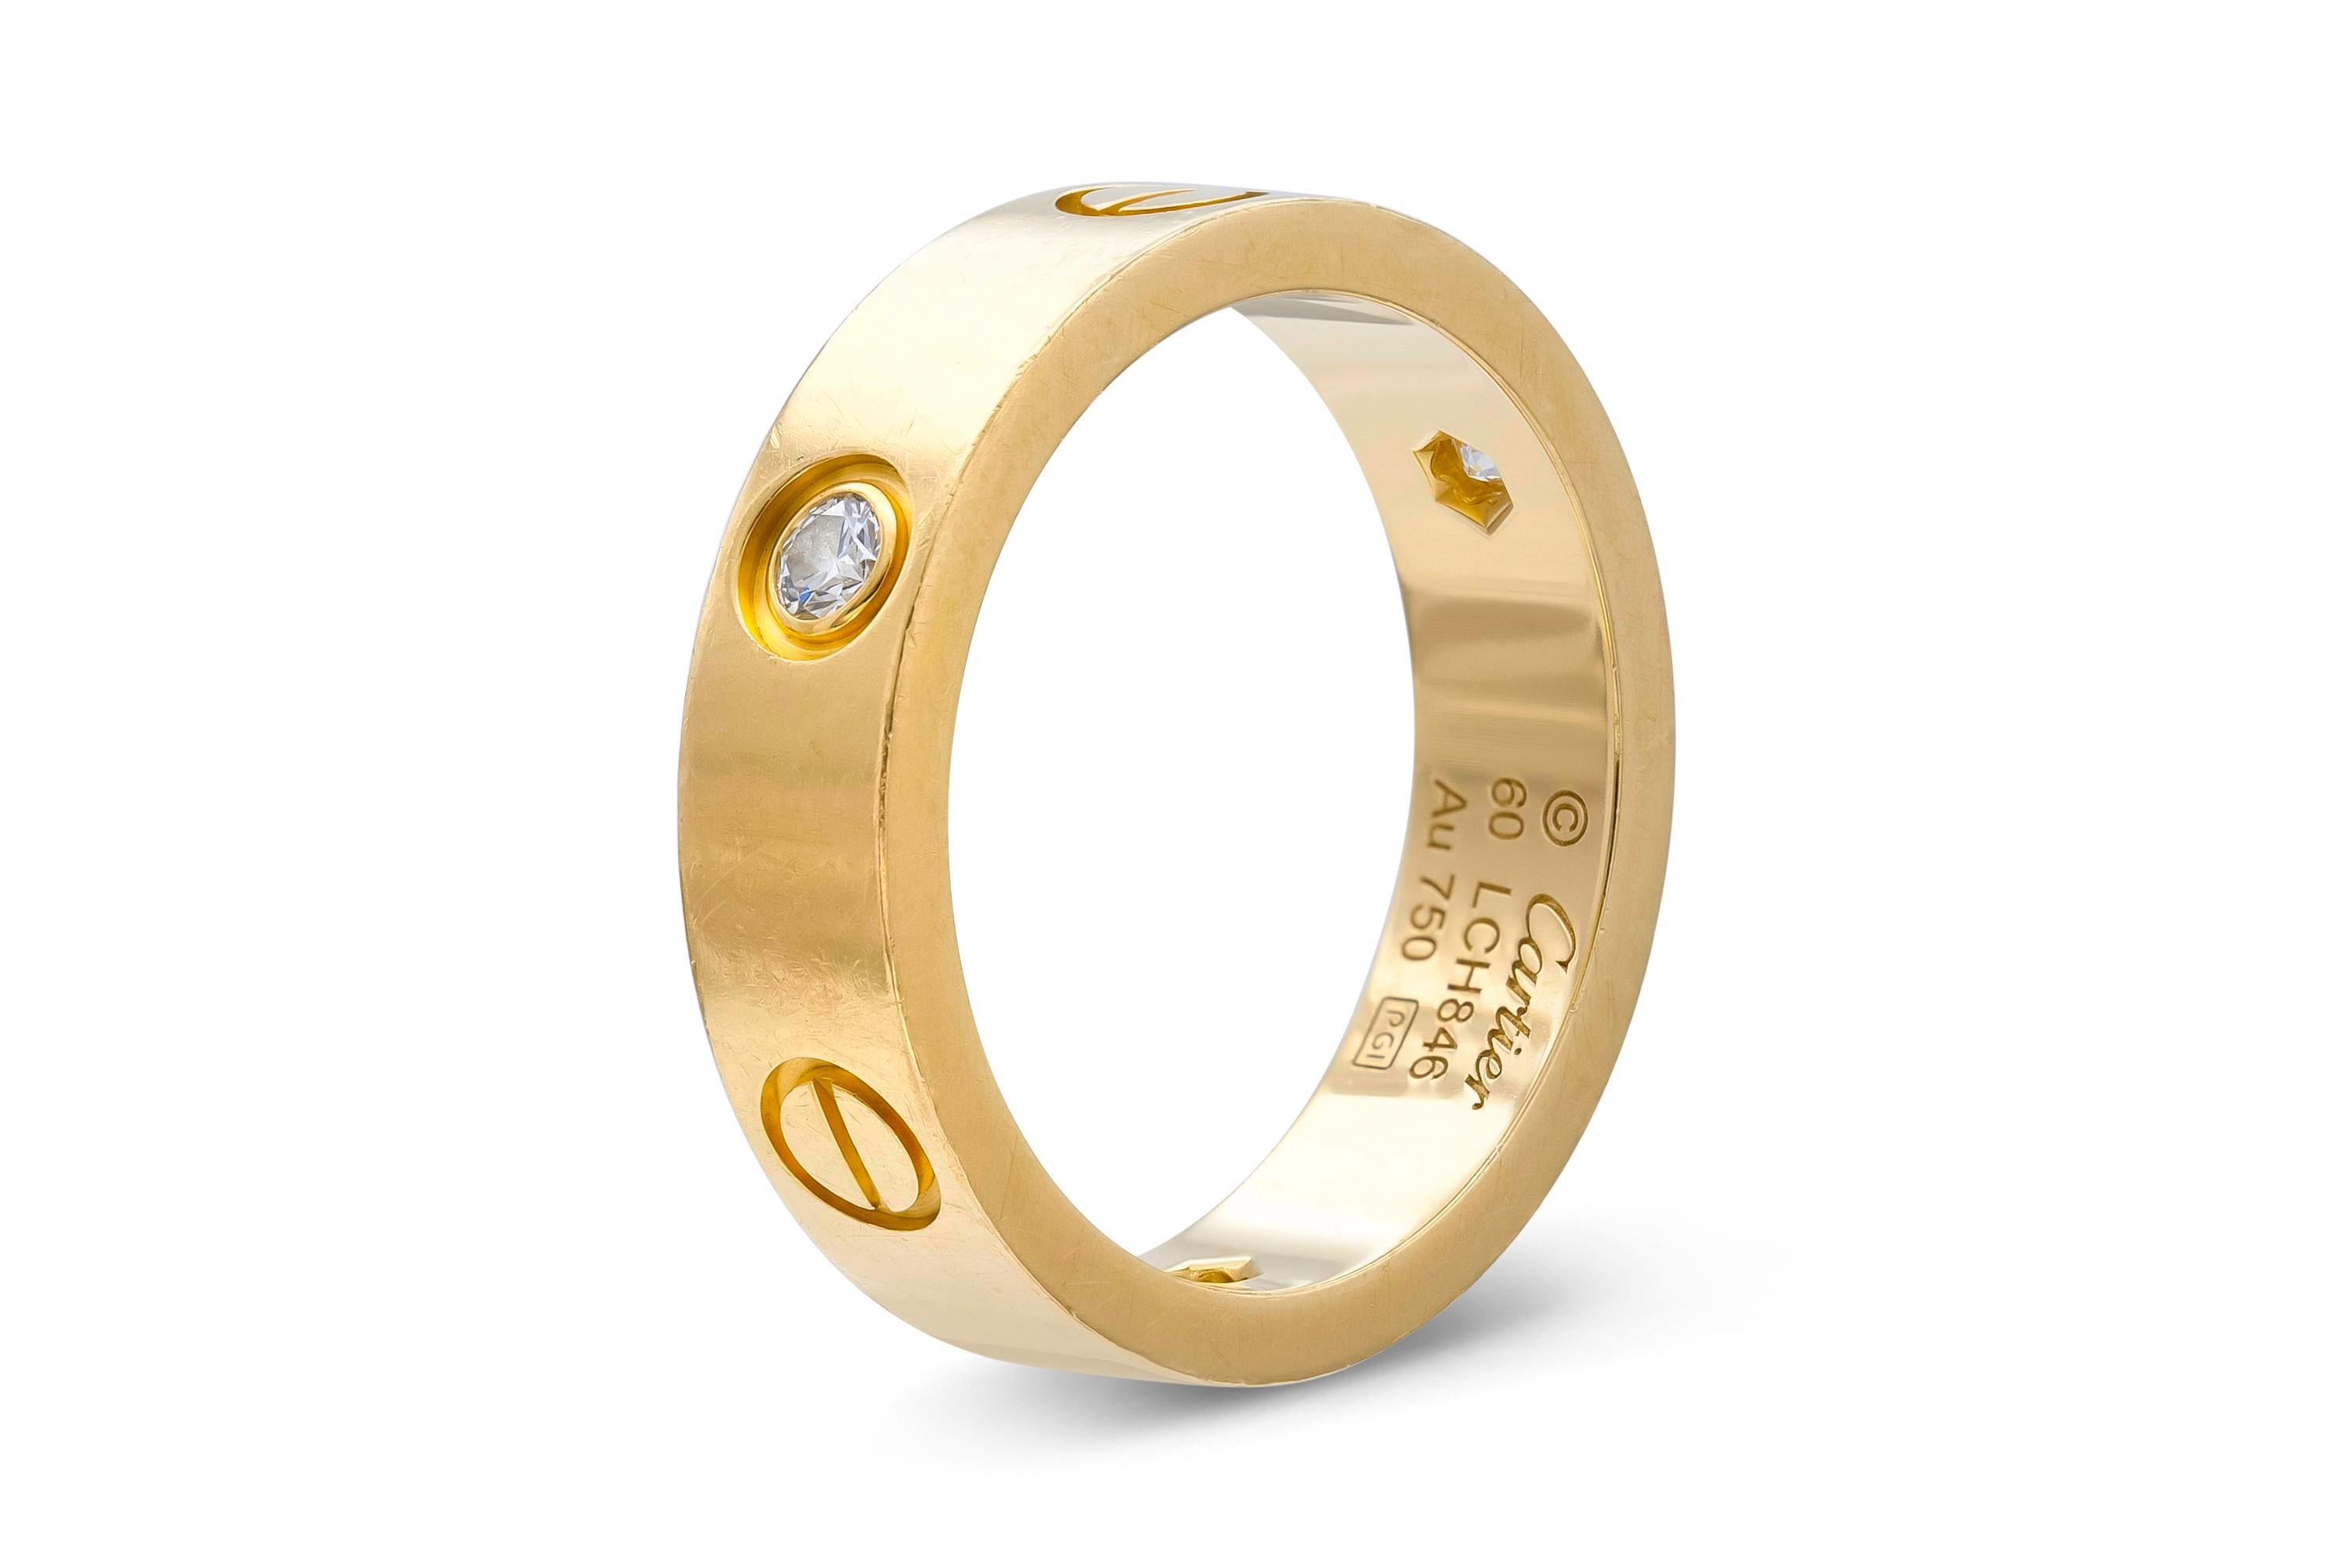 Finely crafted in 18K yellow gold with three diamonds. Signed by Cartier, from their Love collection. Size 9.